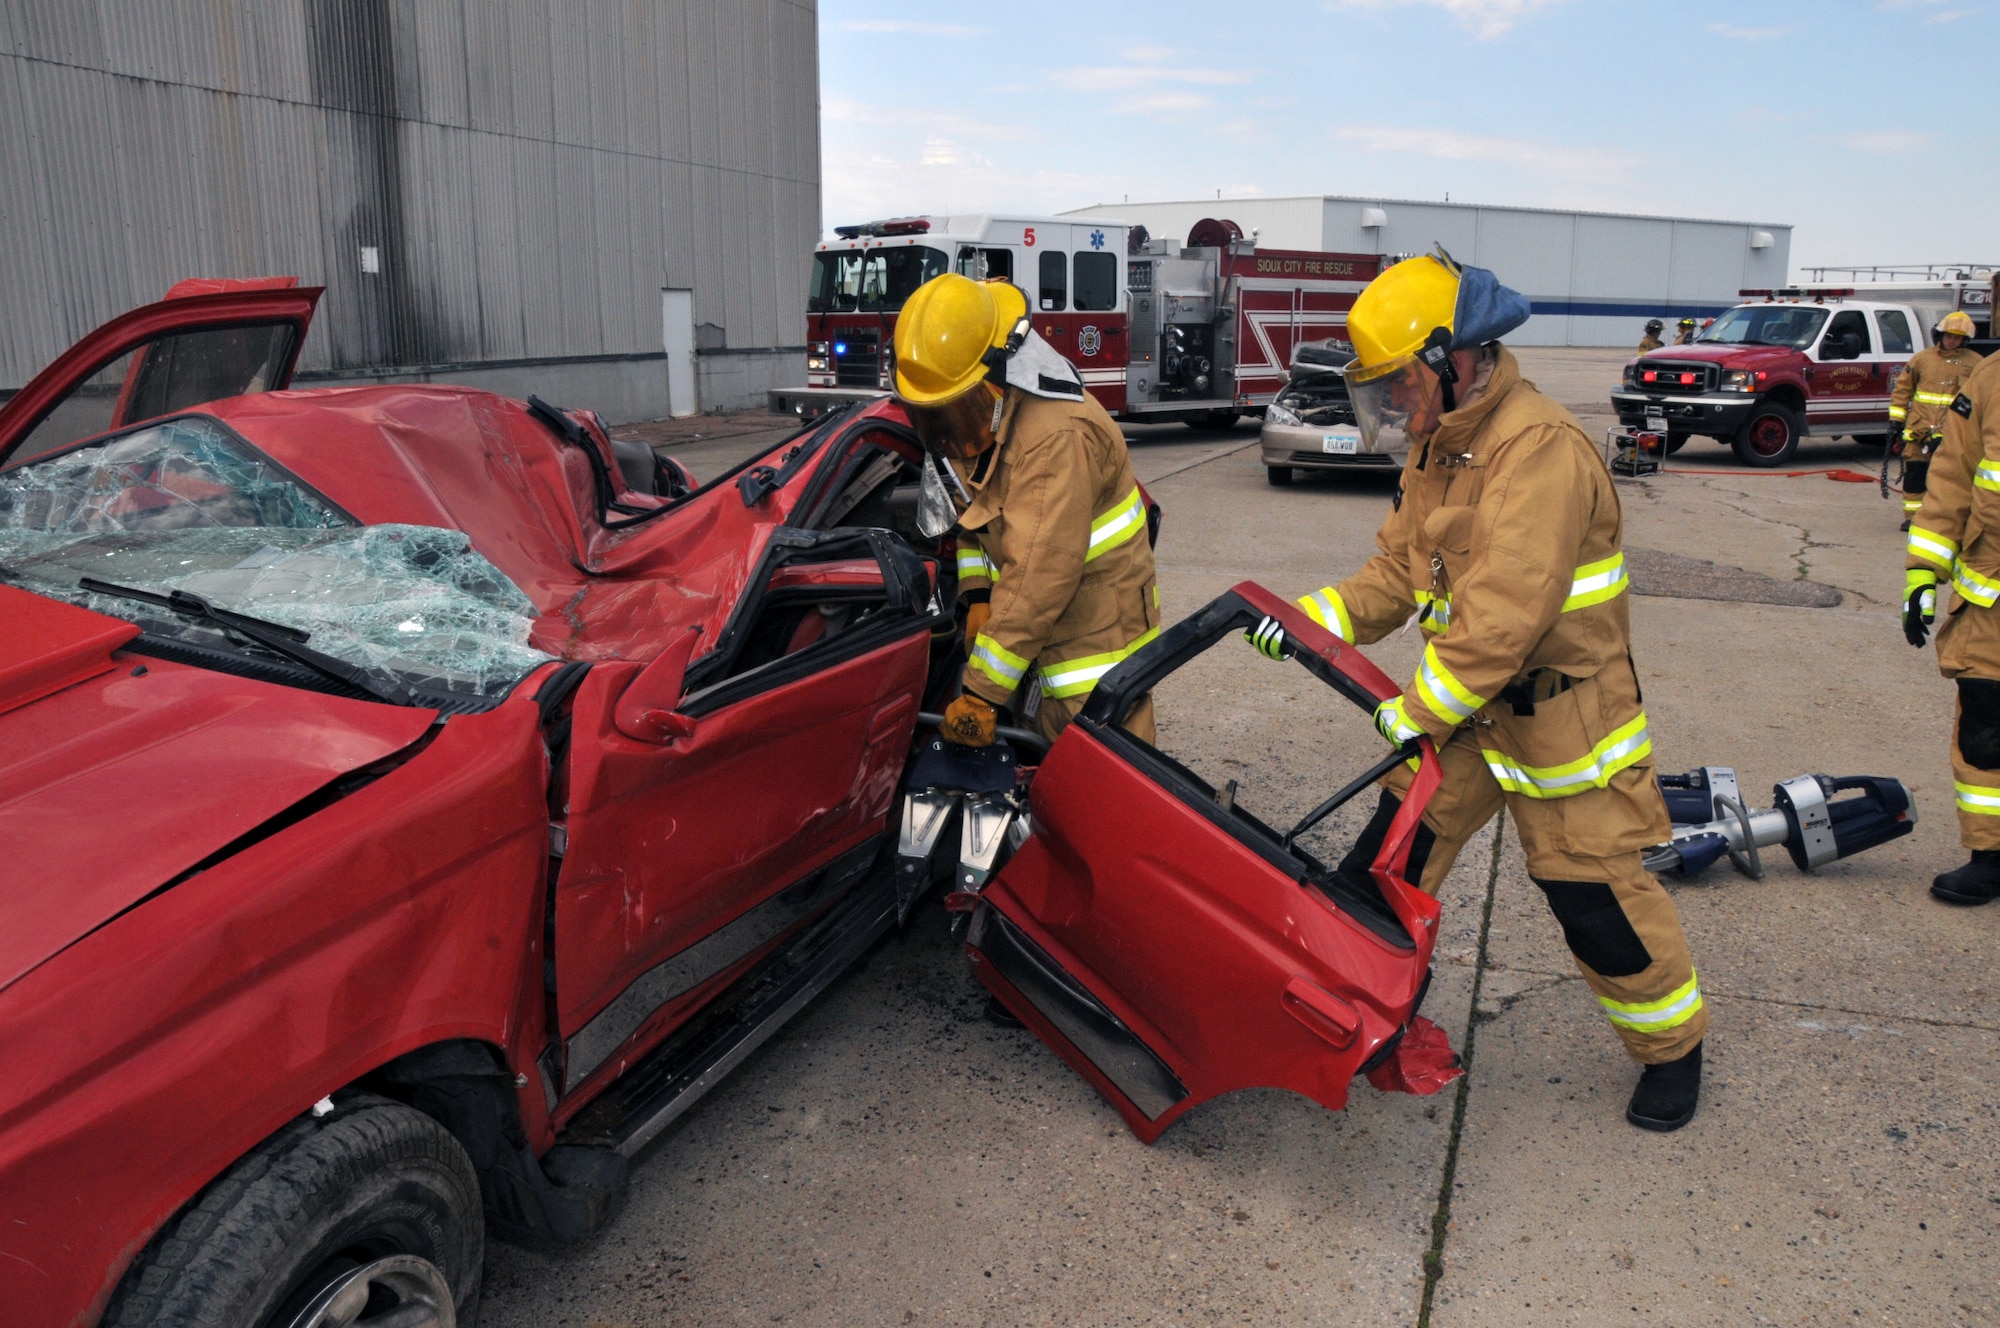 Members of the 185th Air Refueling Wing Fire Protection Services Flight, along with other local fire and rescue groups, practice using the tools and techniques to extract victims from vehicles during a mass casualty exercise at the Sioux Gateway Airport/Col. Bud Day Field in Sioux City, Iowa on Saturday May 2, 2015.  (U.S. Air National Guard photo by Tech. Sgt. Bill Wiseman/Released) 